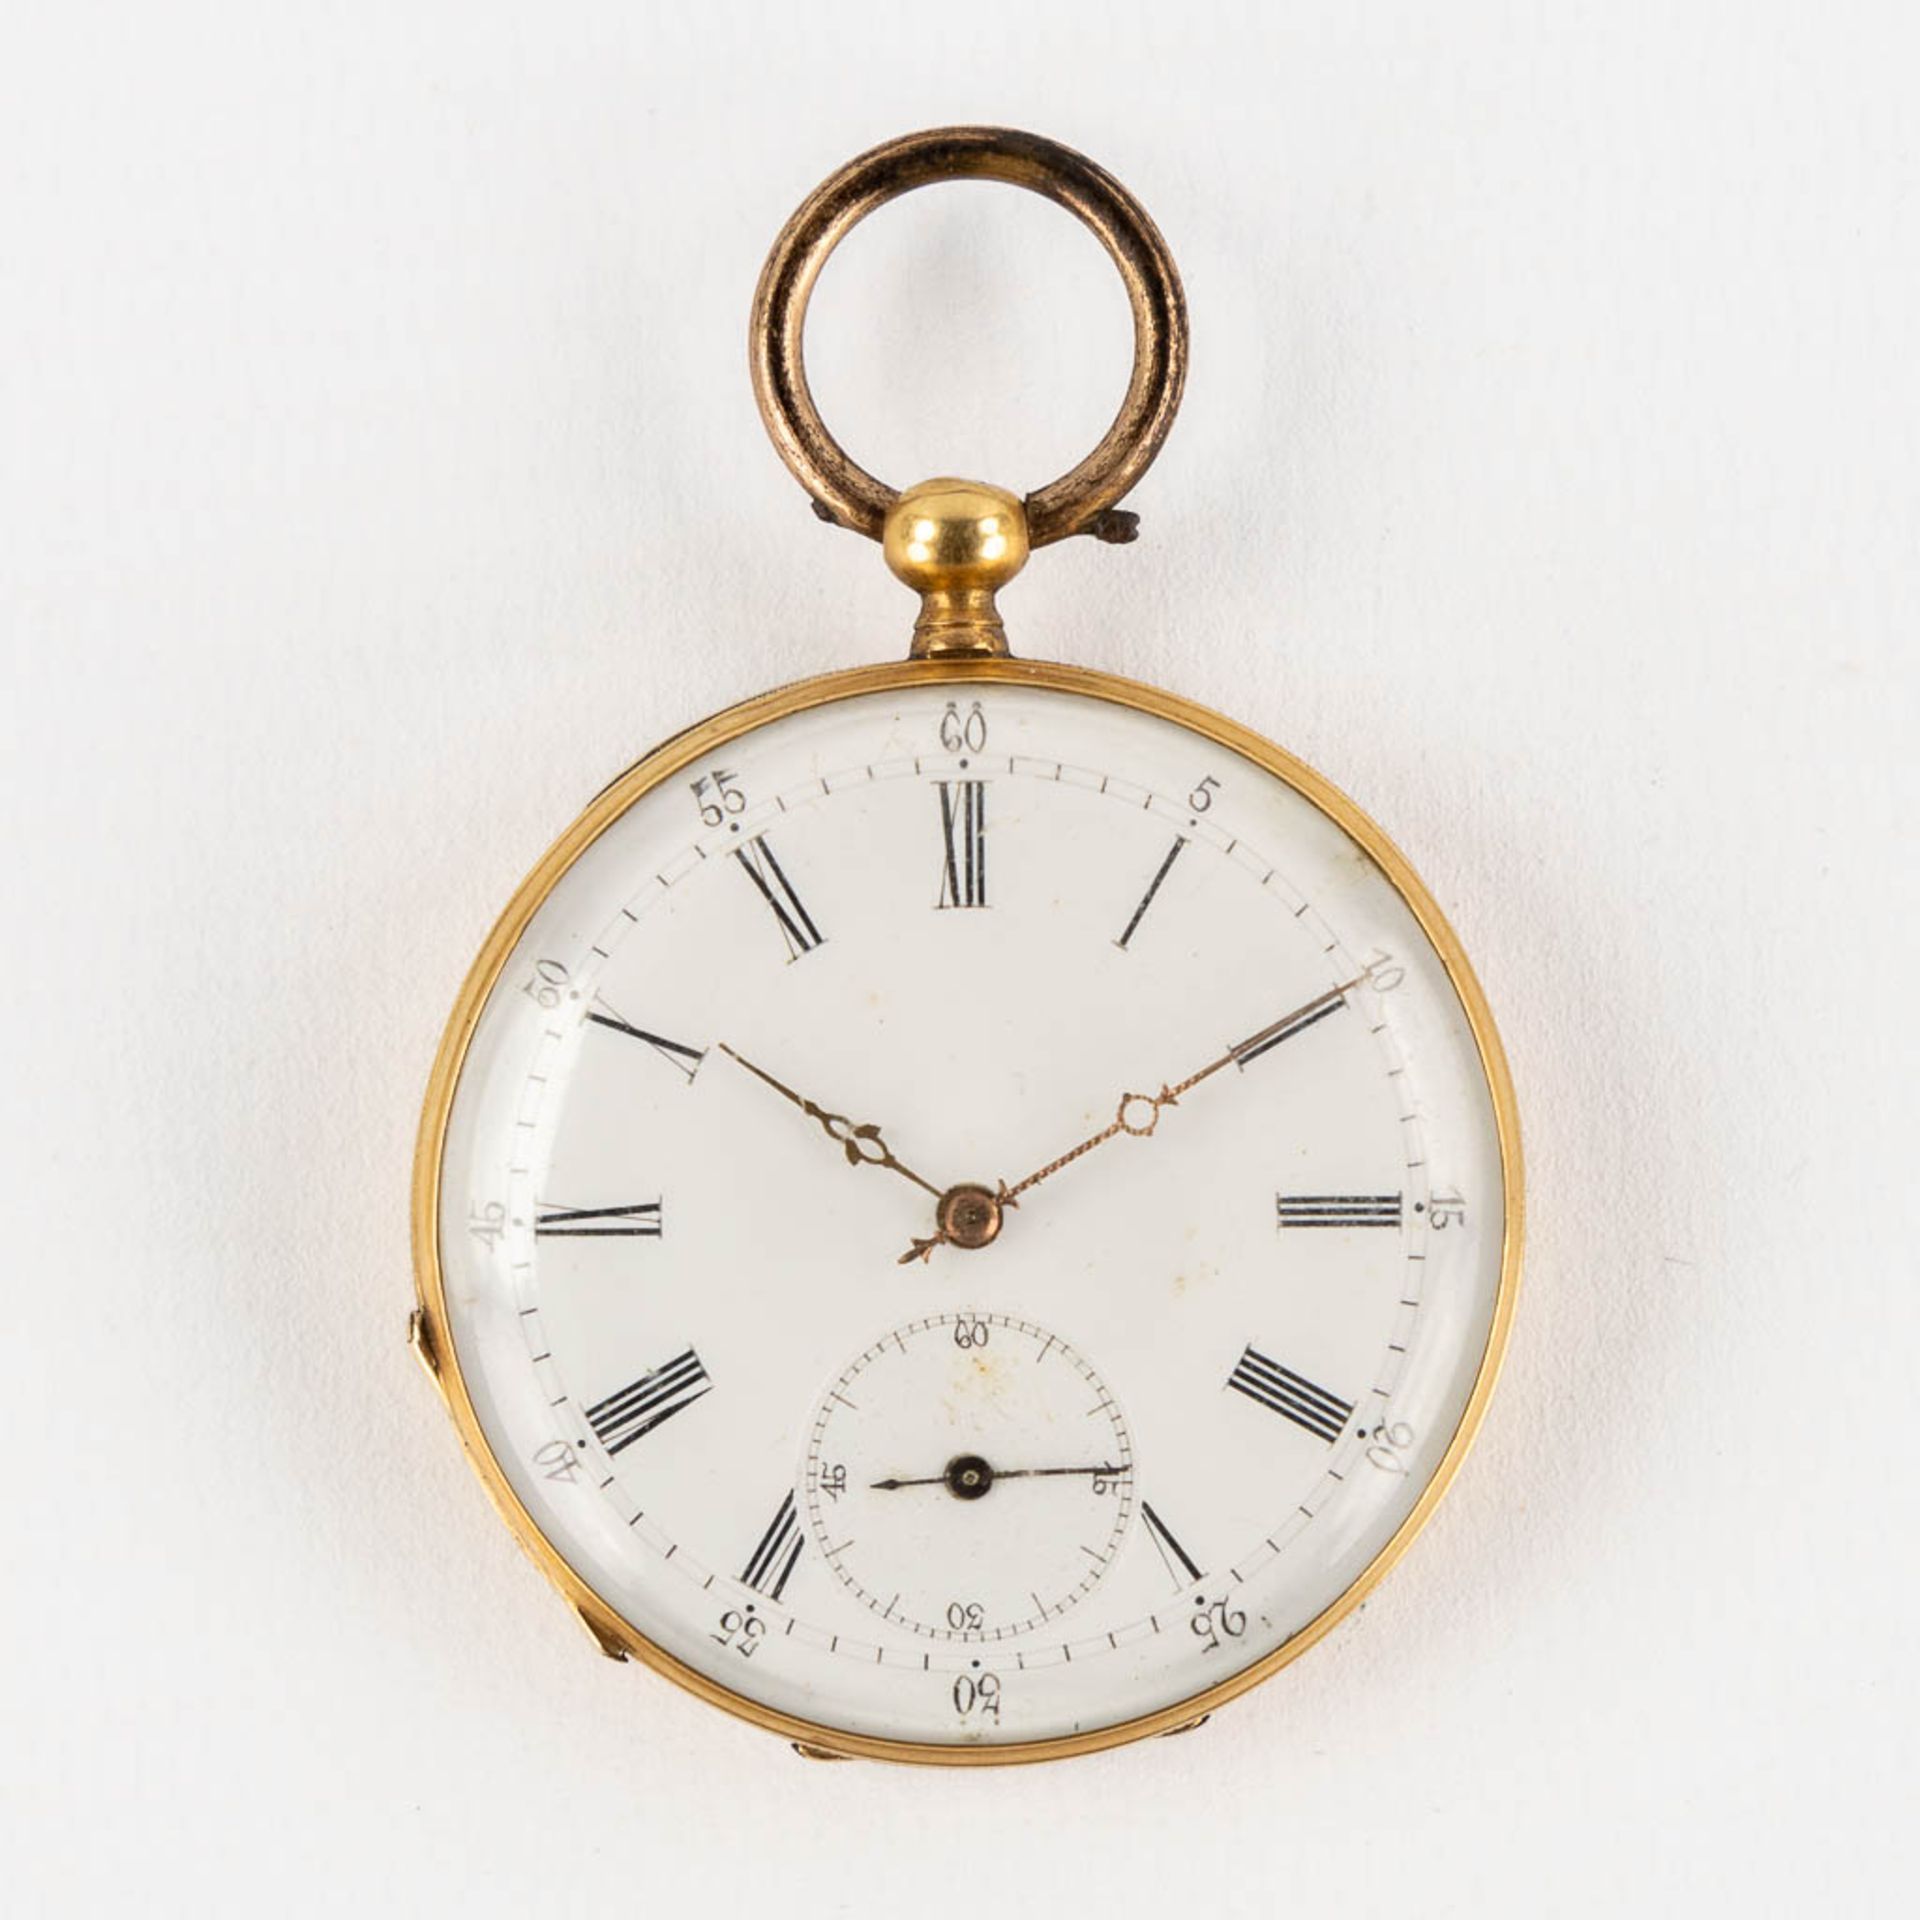 An antique pocket watch, 18kt yellow gold. Guioche image of a running horse. (W:4,3 x H:6,3 cm) - Image 4 of 15